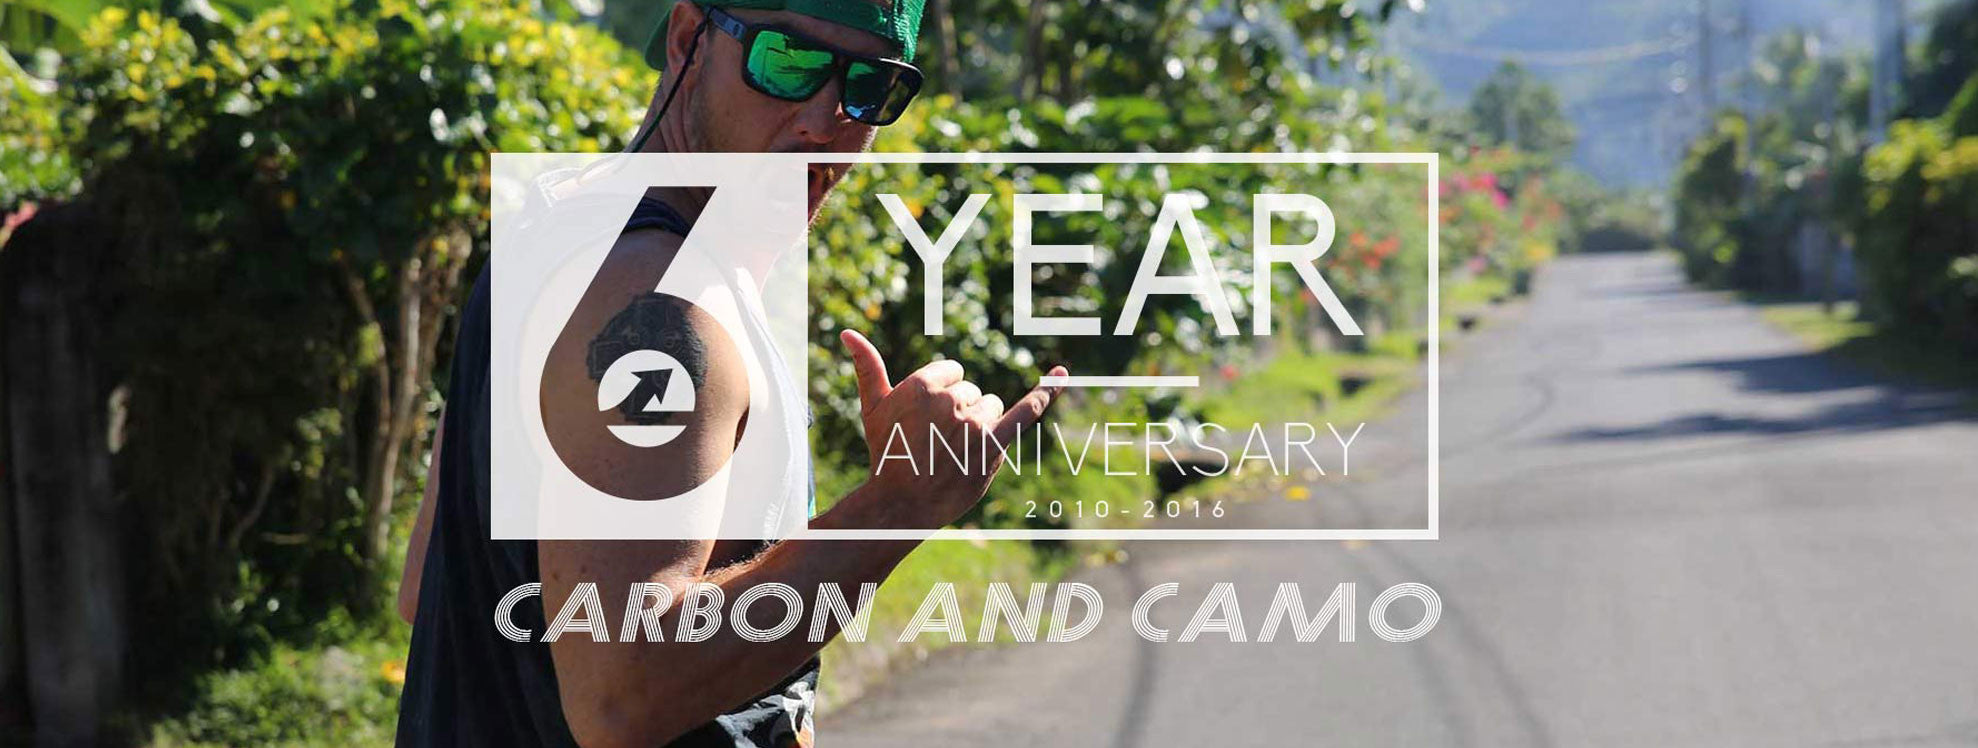 Slyde Handboards 6 Year Anniversary: Year In Review